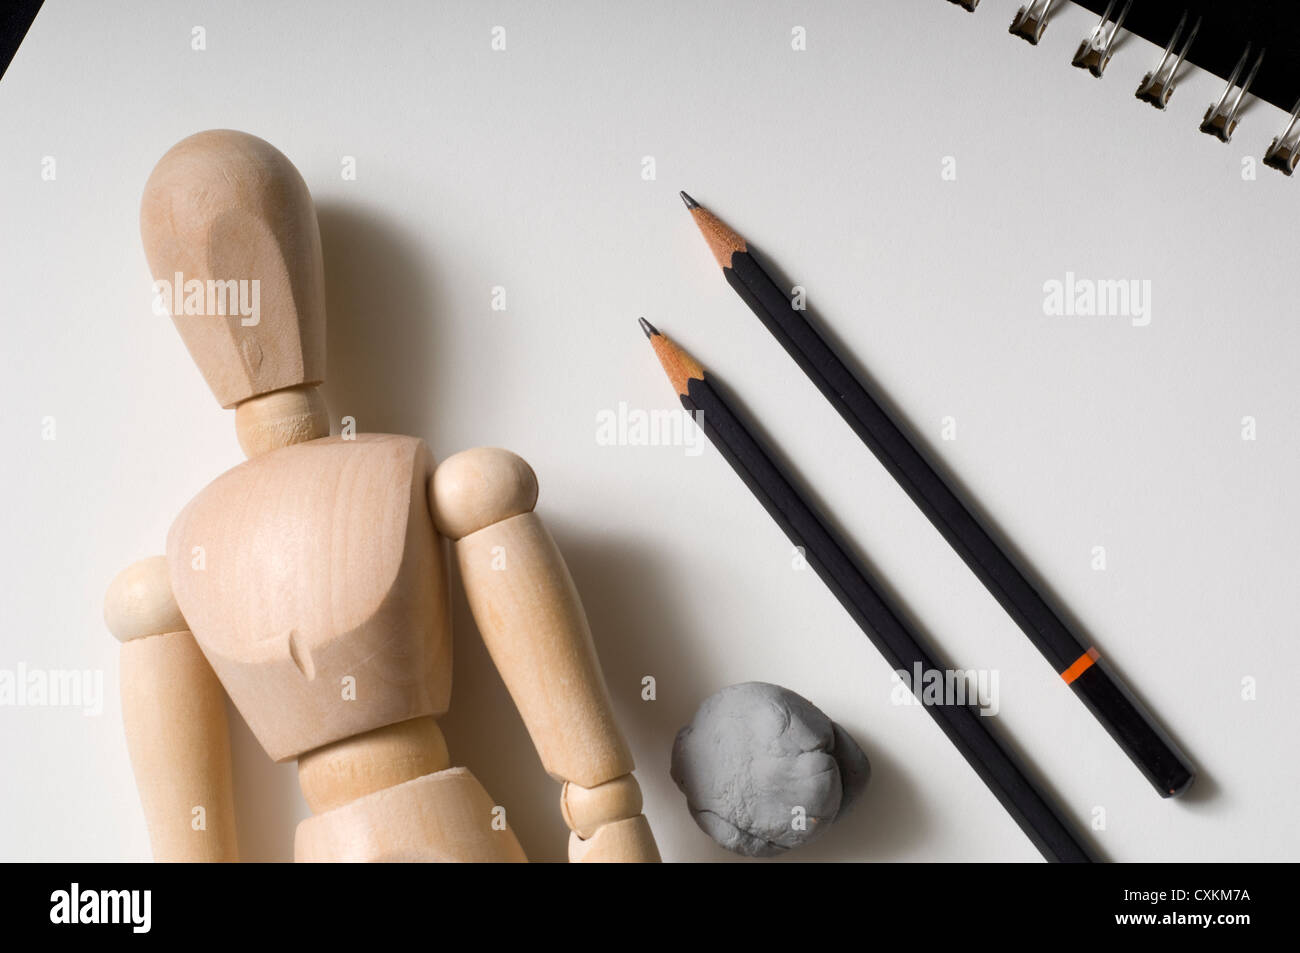 Drawing supplies including a wooden poser, pencils and an eraser Stock Photo